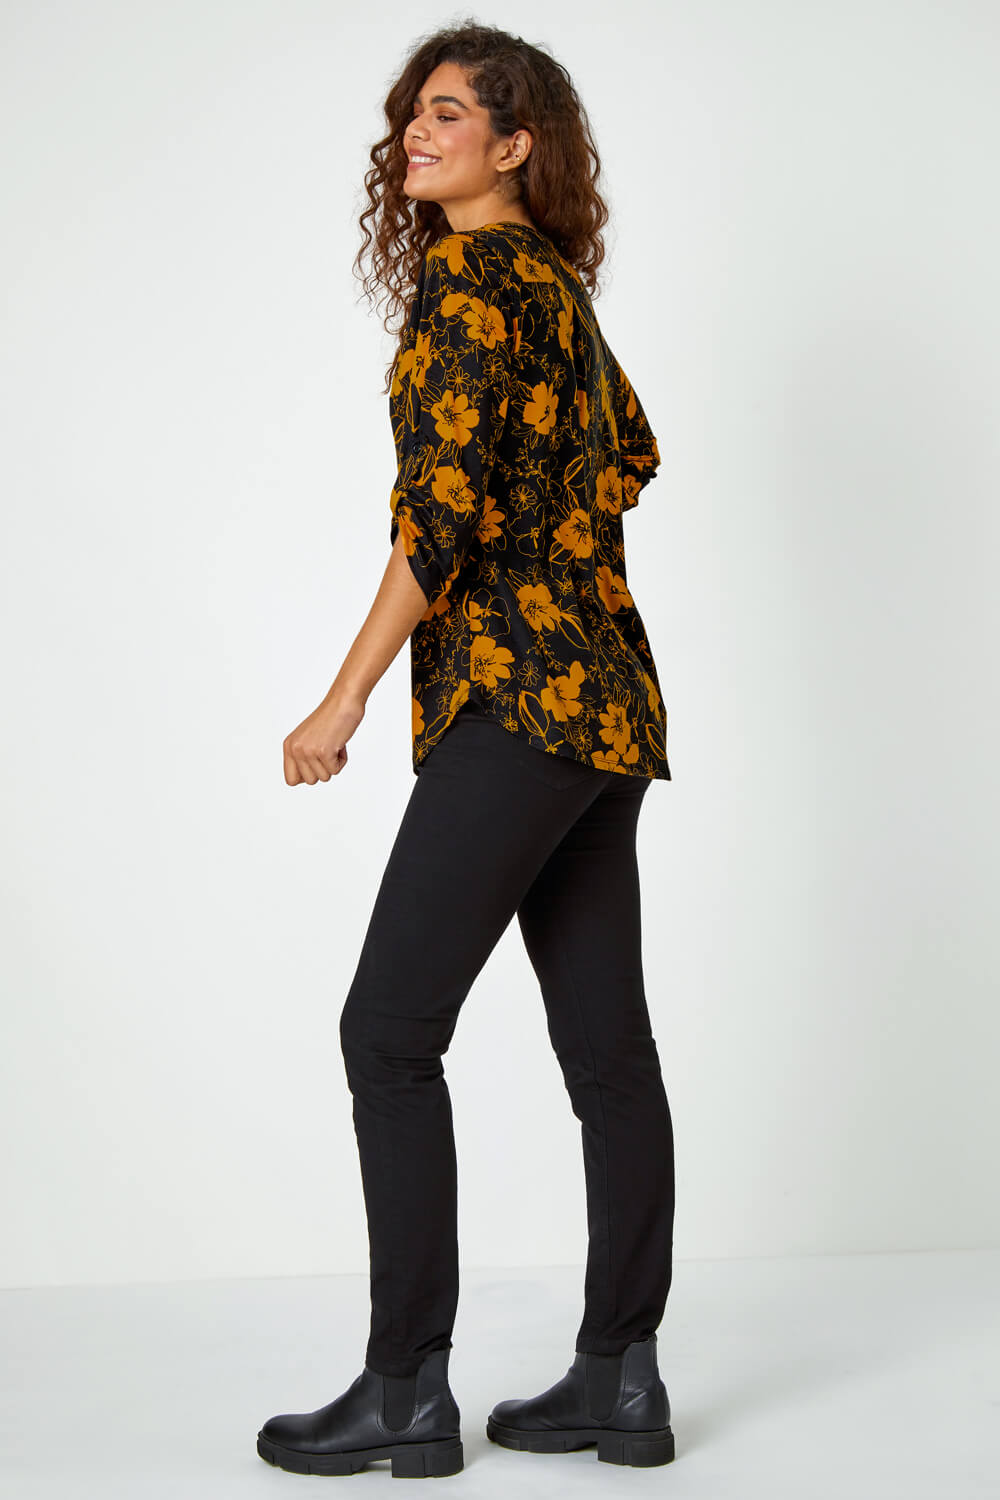 Ochre Floral Print Stretch Shirt, Image 3 of 5